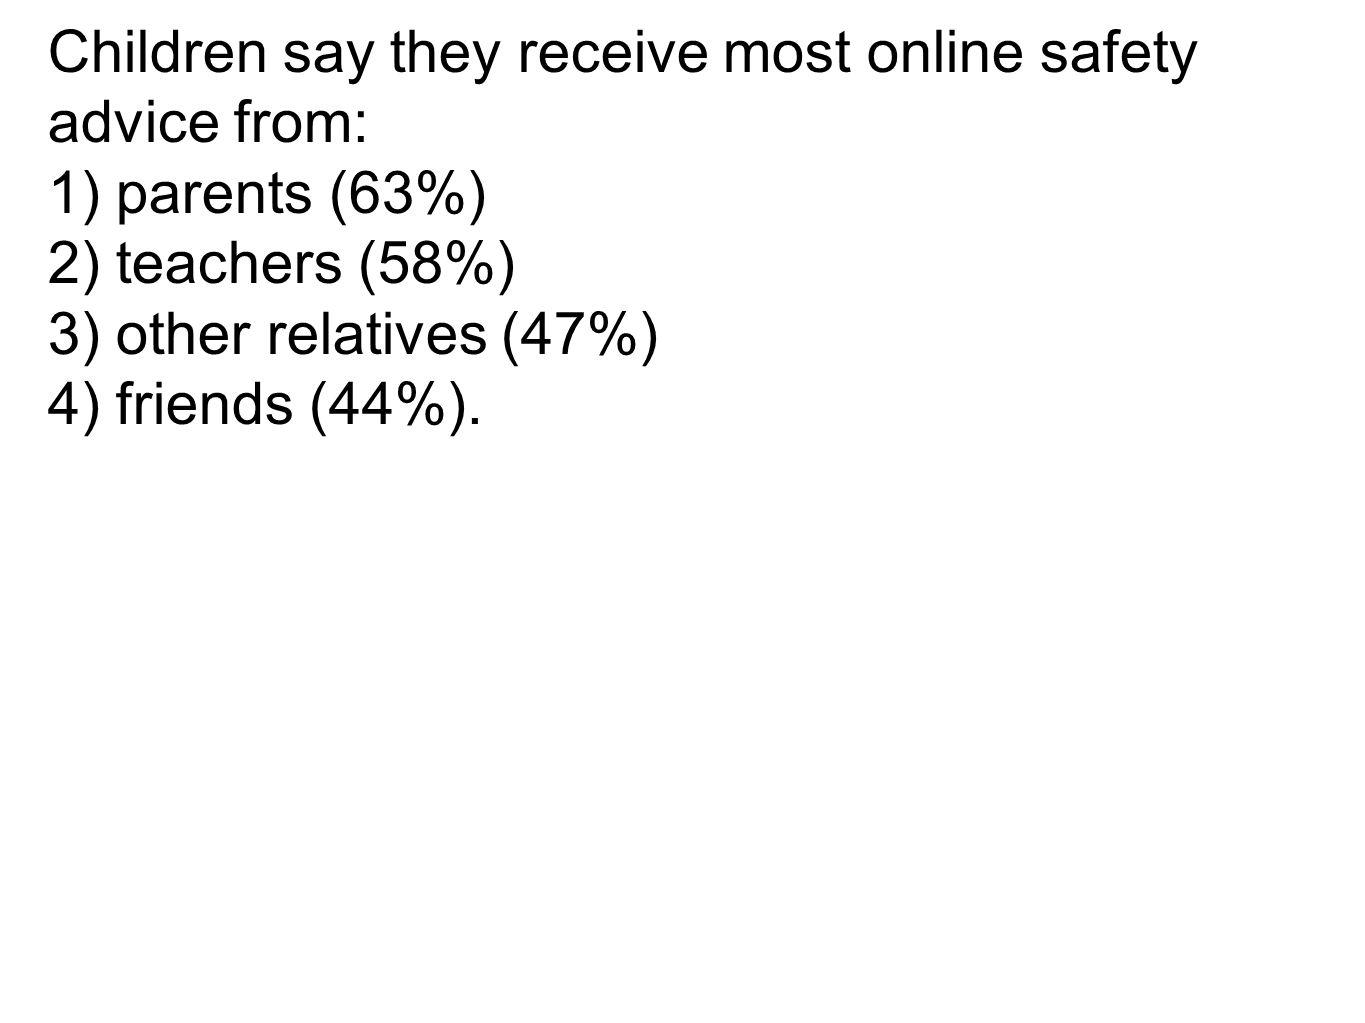 Children say they receive most online safety advice from: 1) parents (63%) 2) teachers (58%) 3) other relatives (47%) 4) friends (44%).